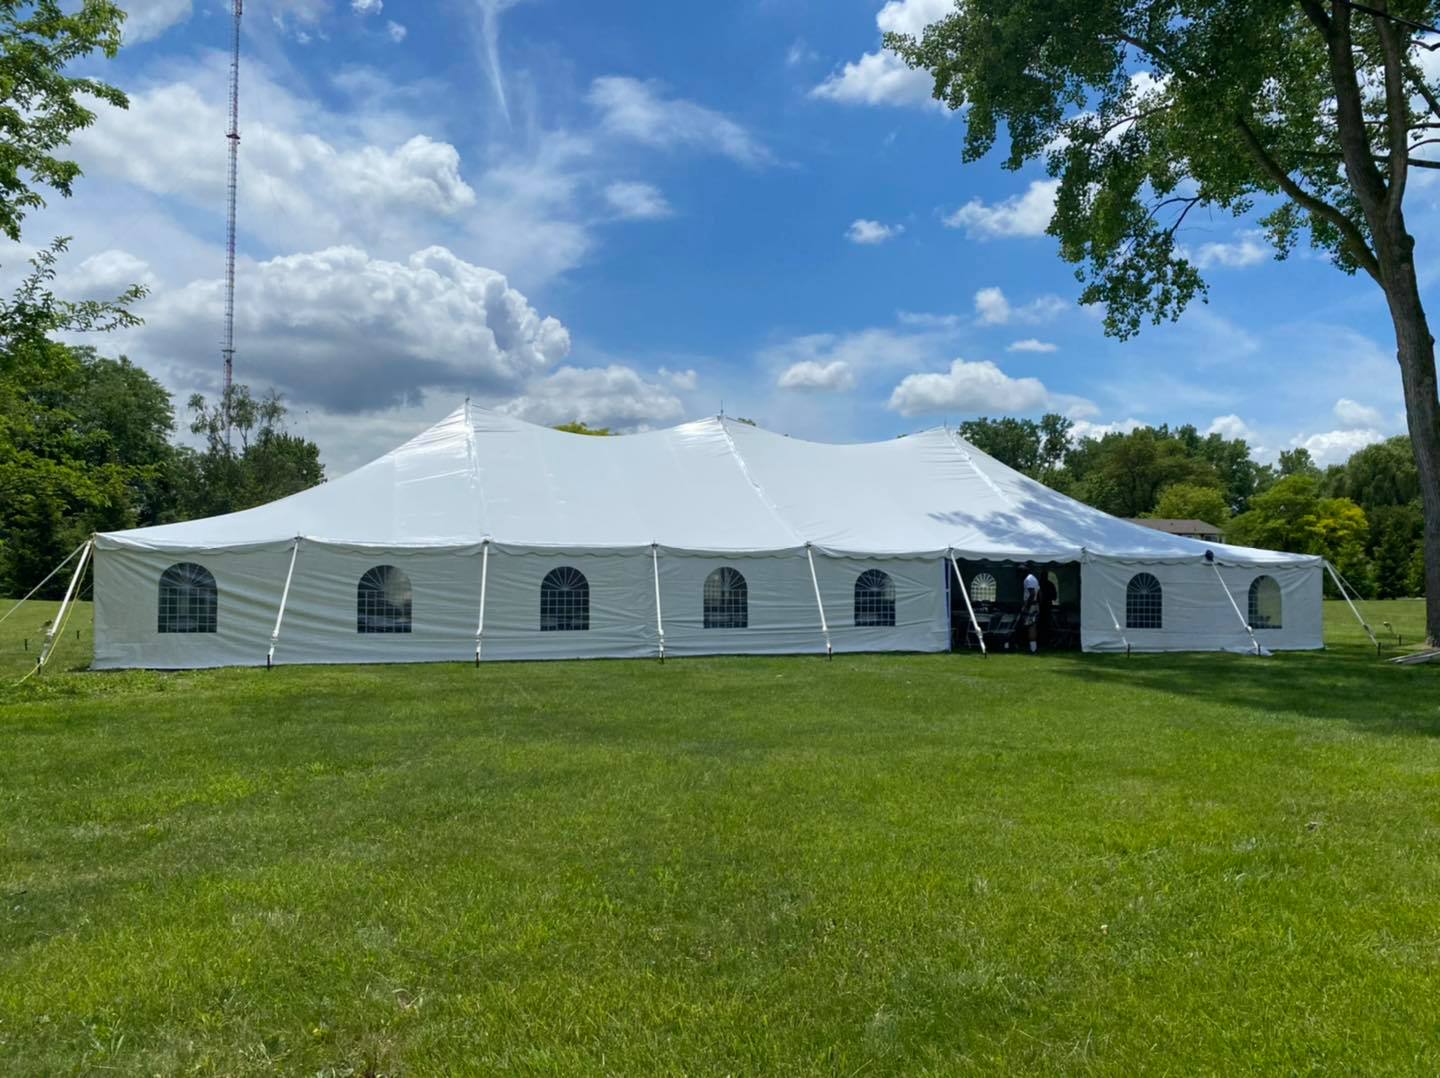 Clinton Township enclosed heated tent rental